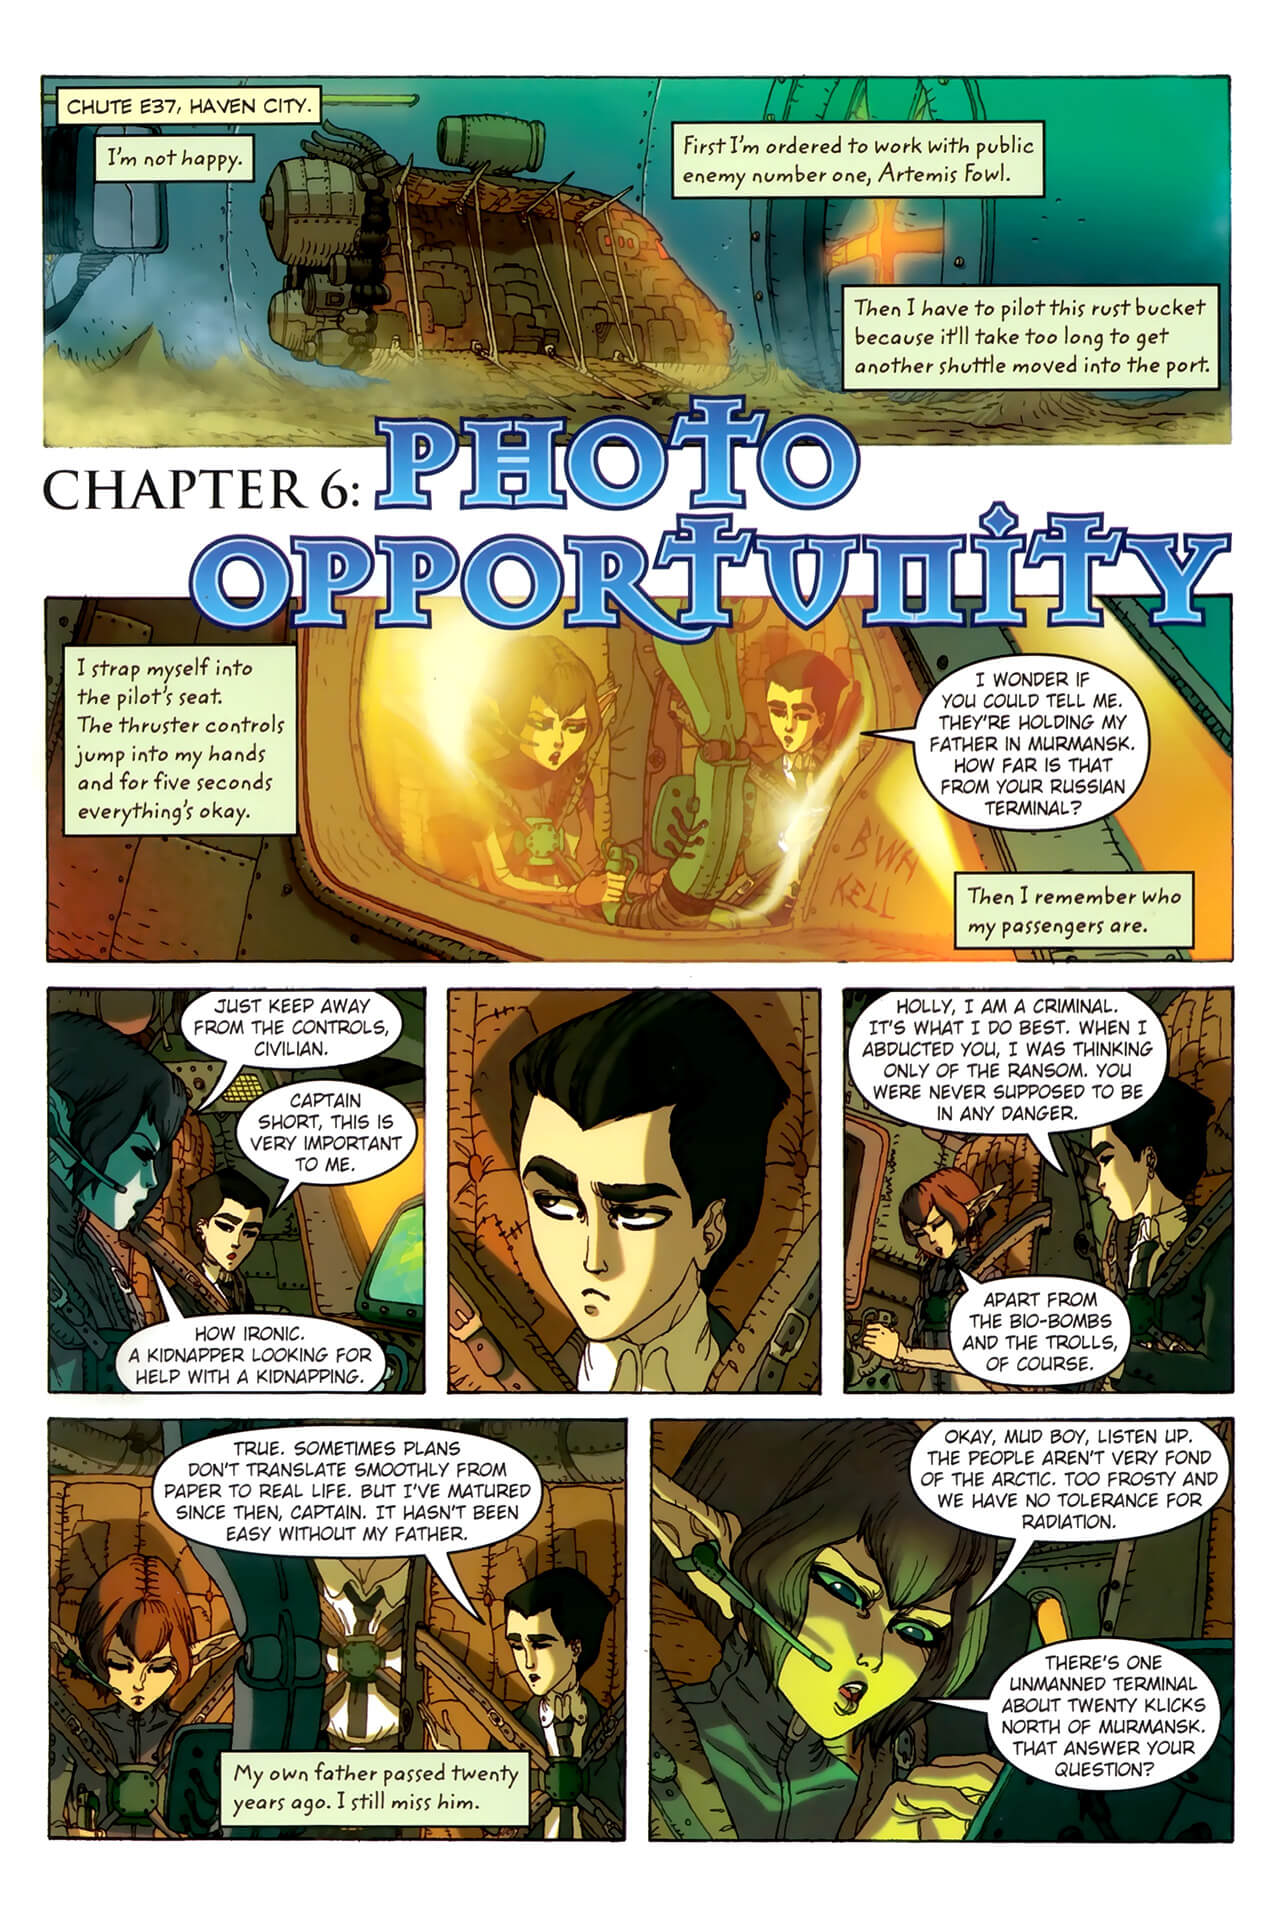 page 41 of artemis fowl the arctic incident graphic novel